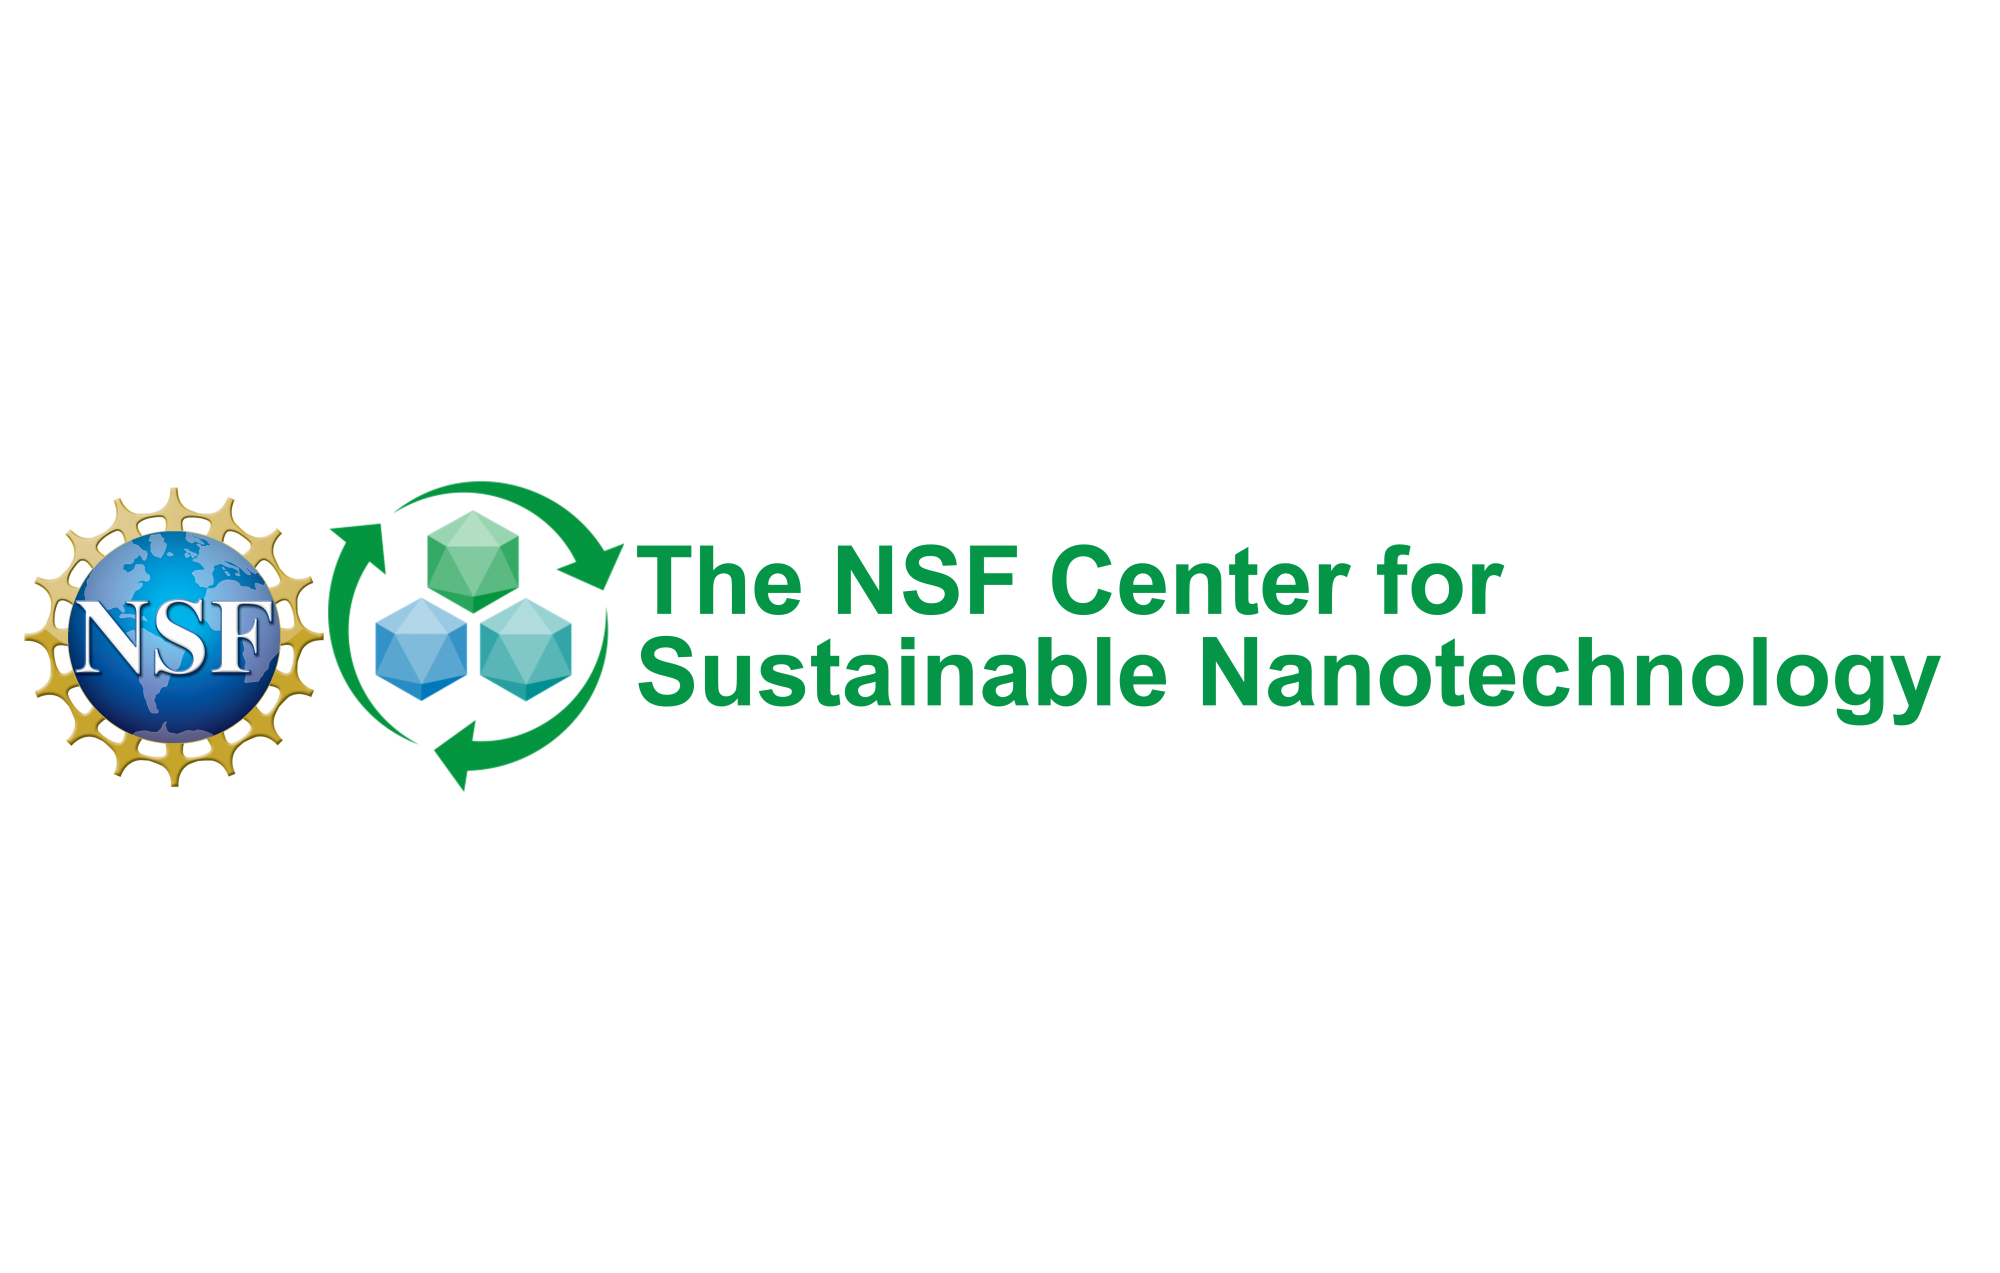 The NSF Center for Sustainable Nanotechnology with NSF and CSN logos